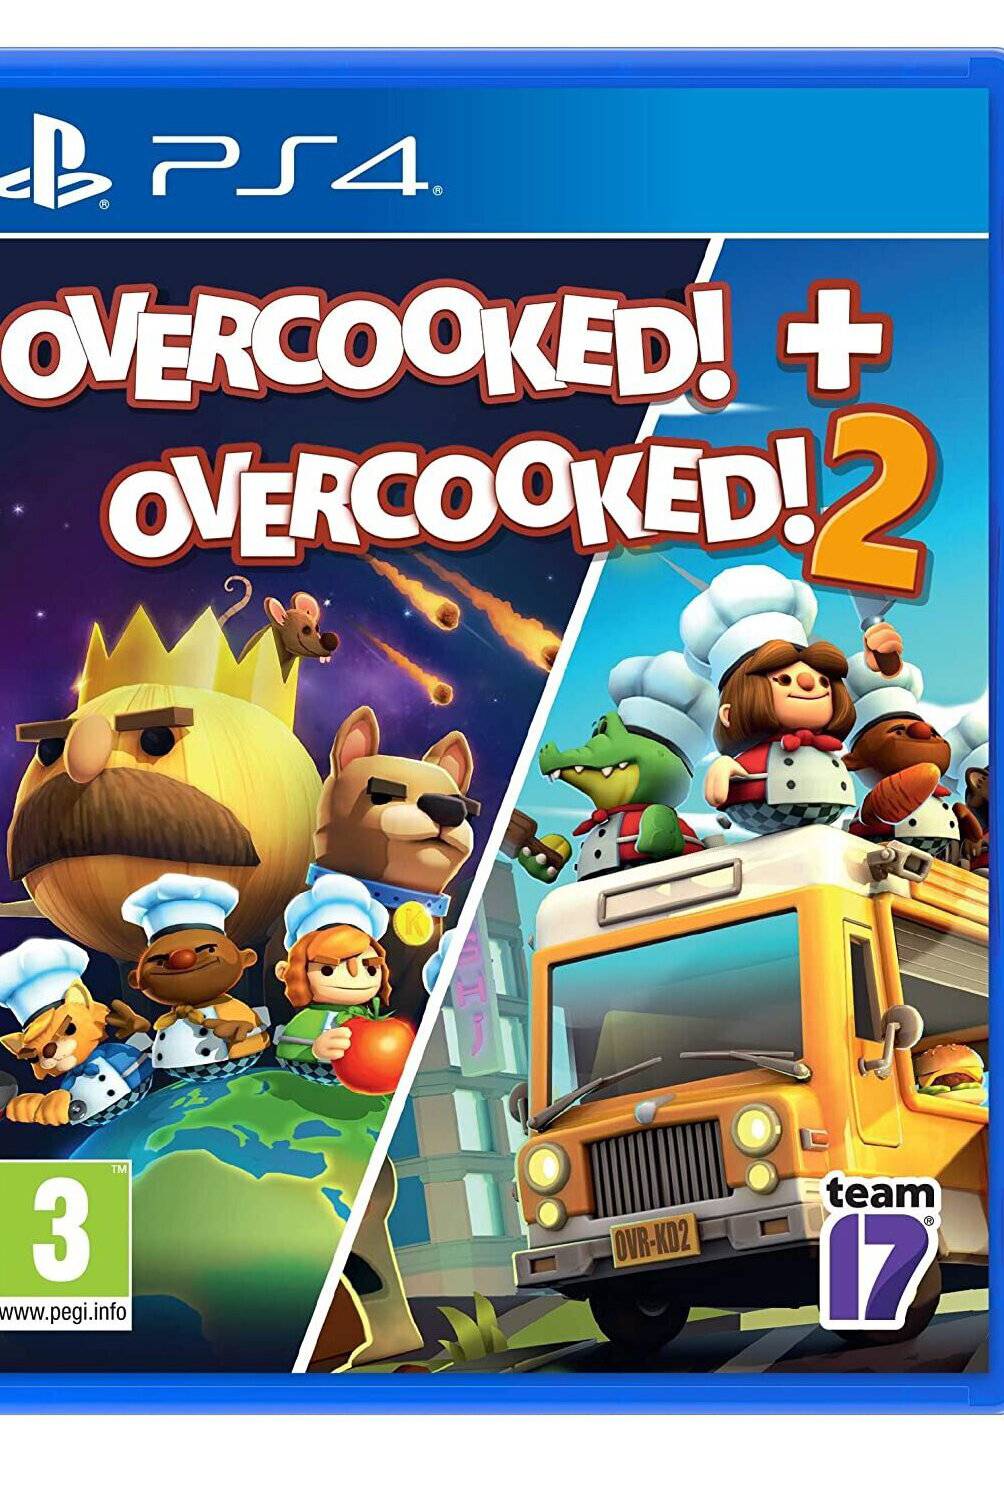 PLAYSTATION - Overcooked! 12 - PS4